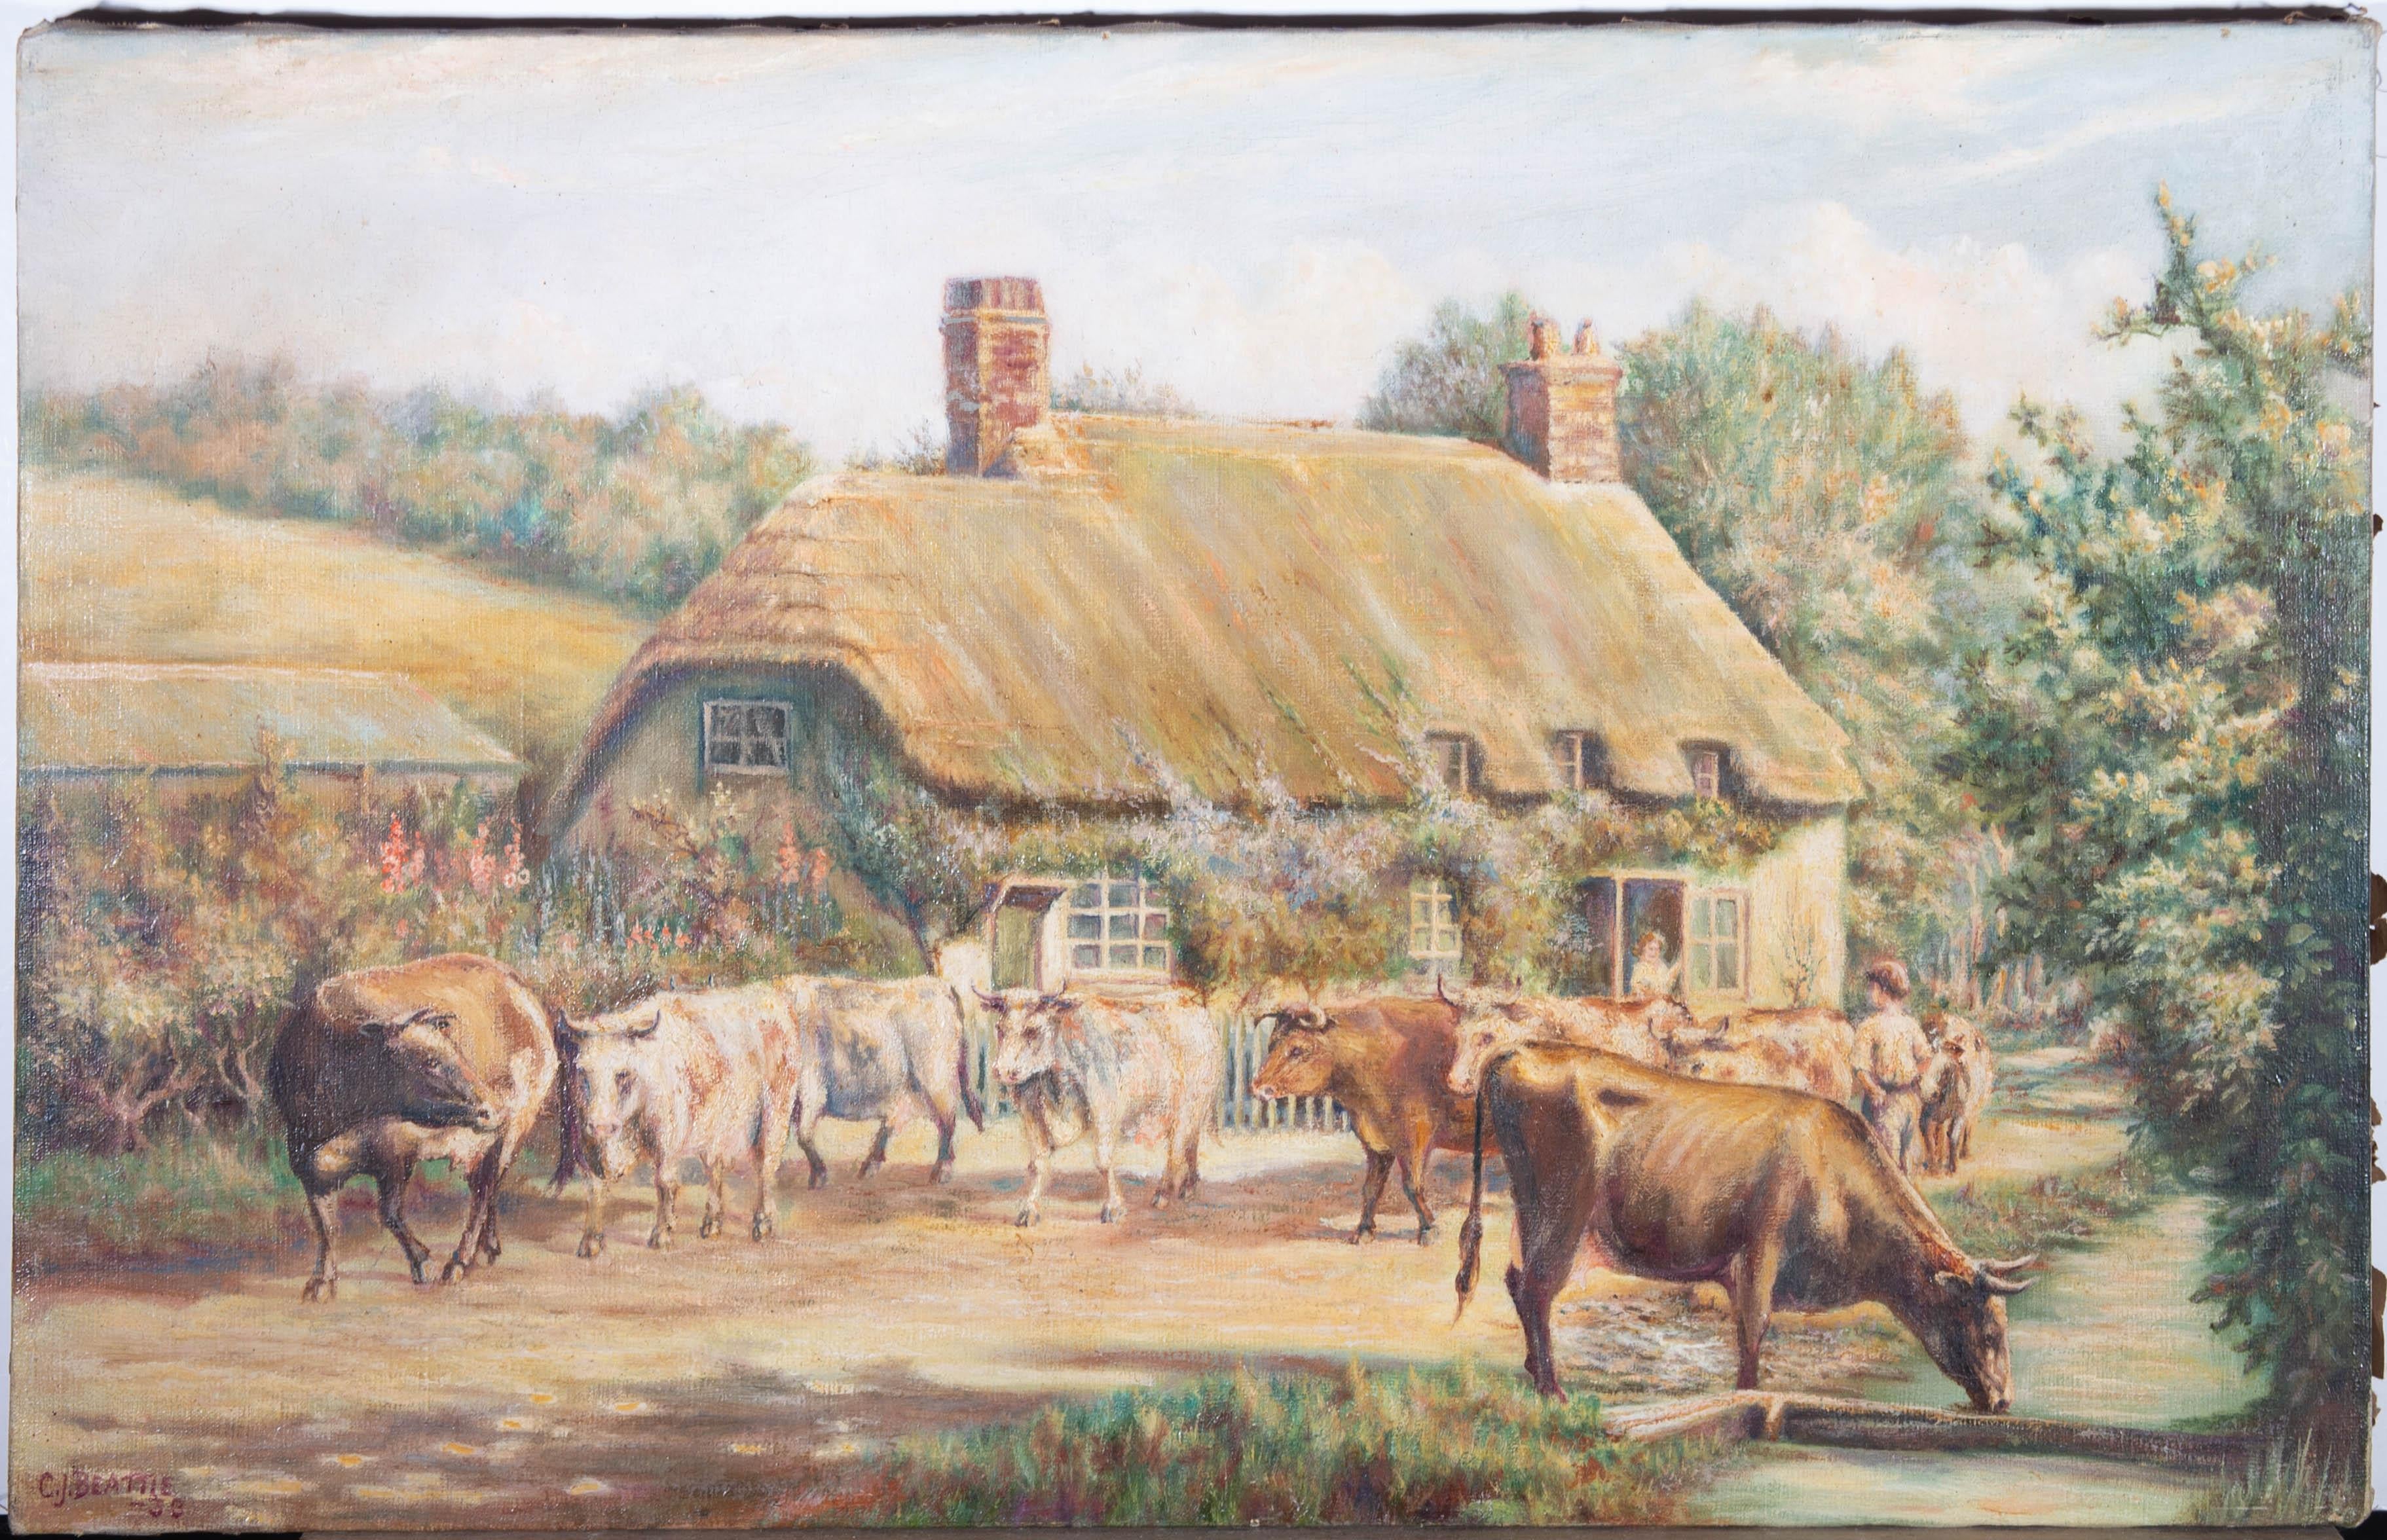 A charming scene depicting a herd of cows by a quaint thatched cottage. Painted in fine detail, the artist has captured the this country scene with intricate brush strokes and delicate colour palette. Signed and dated to the lower right. On canvas